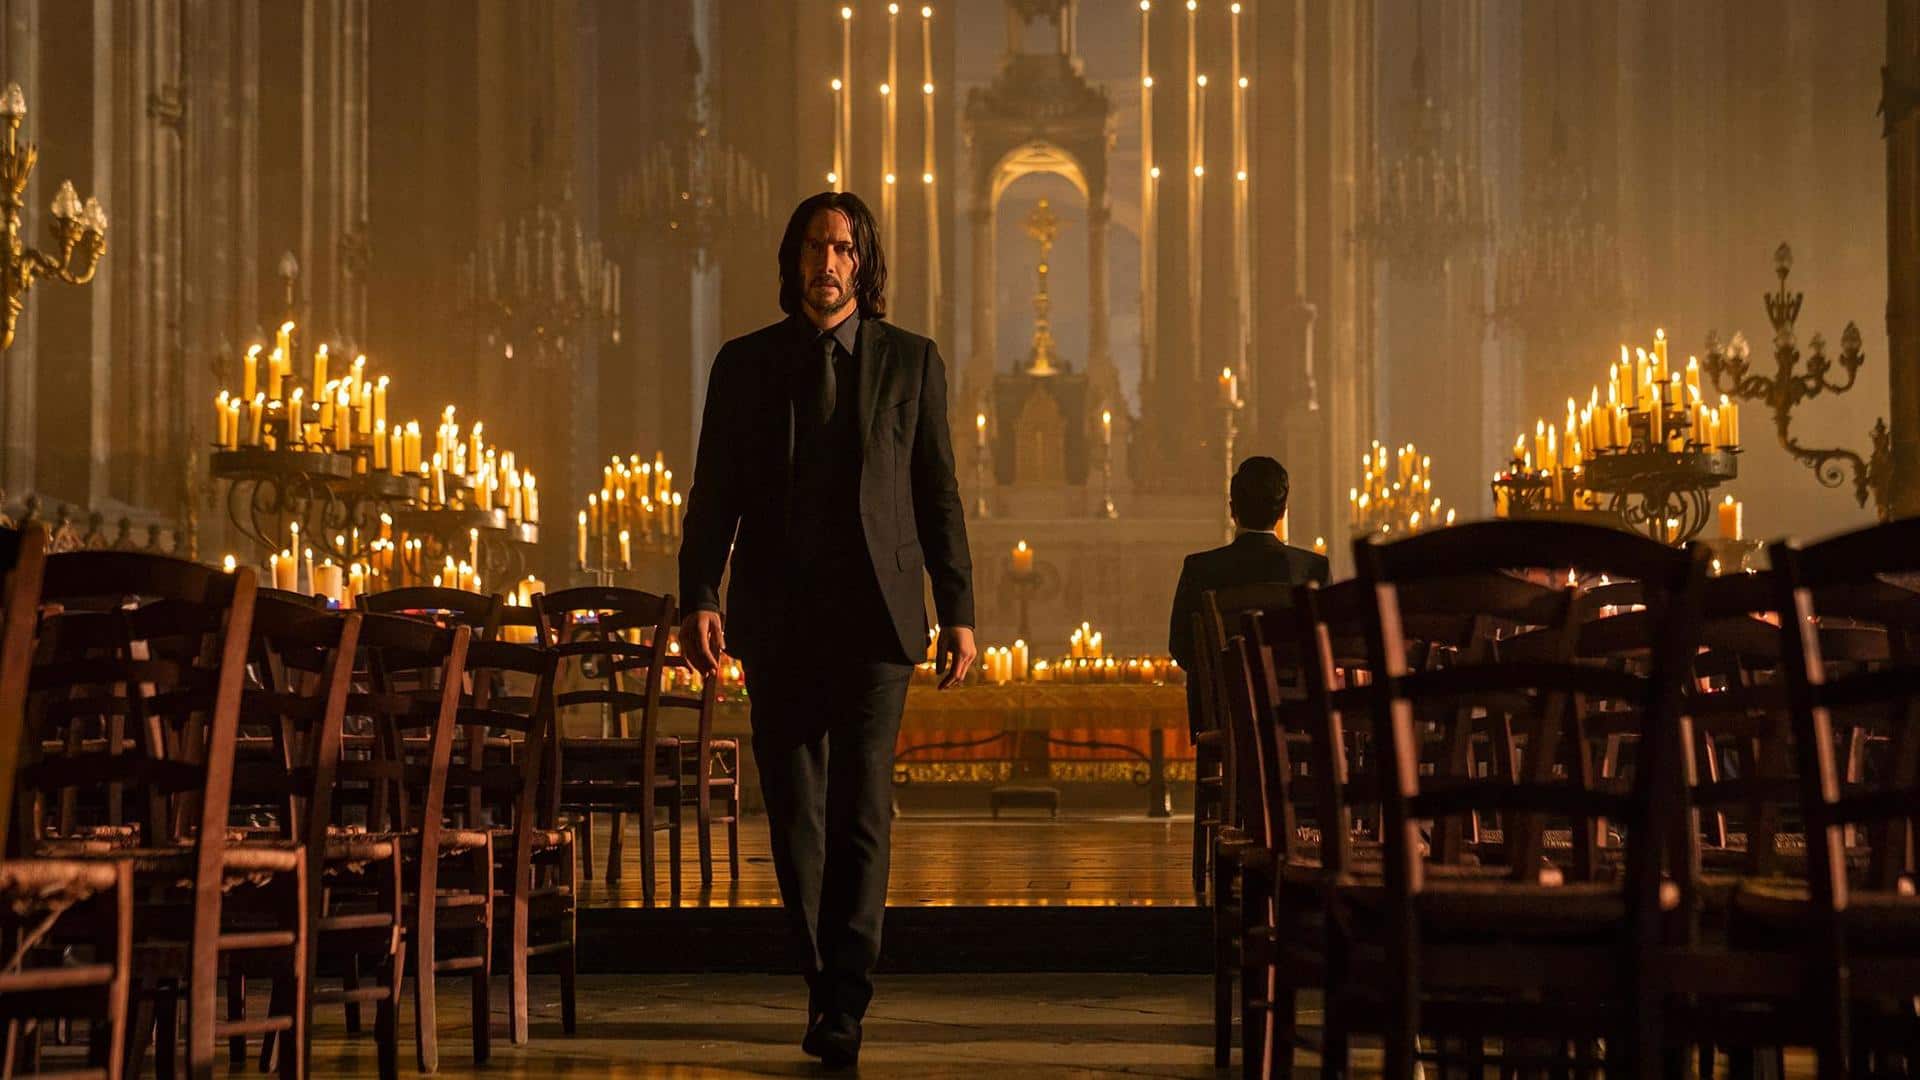 Box office: 'John Wick 4' is here to stay